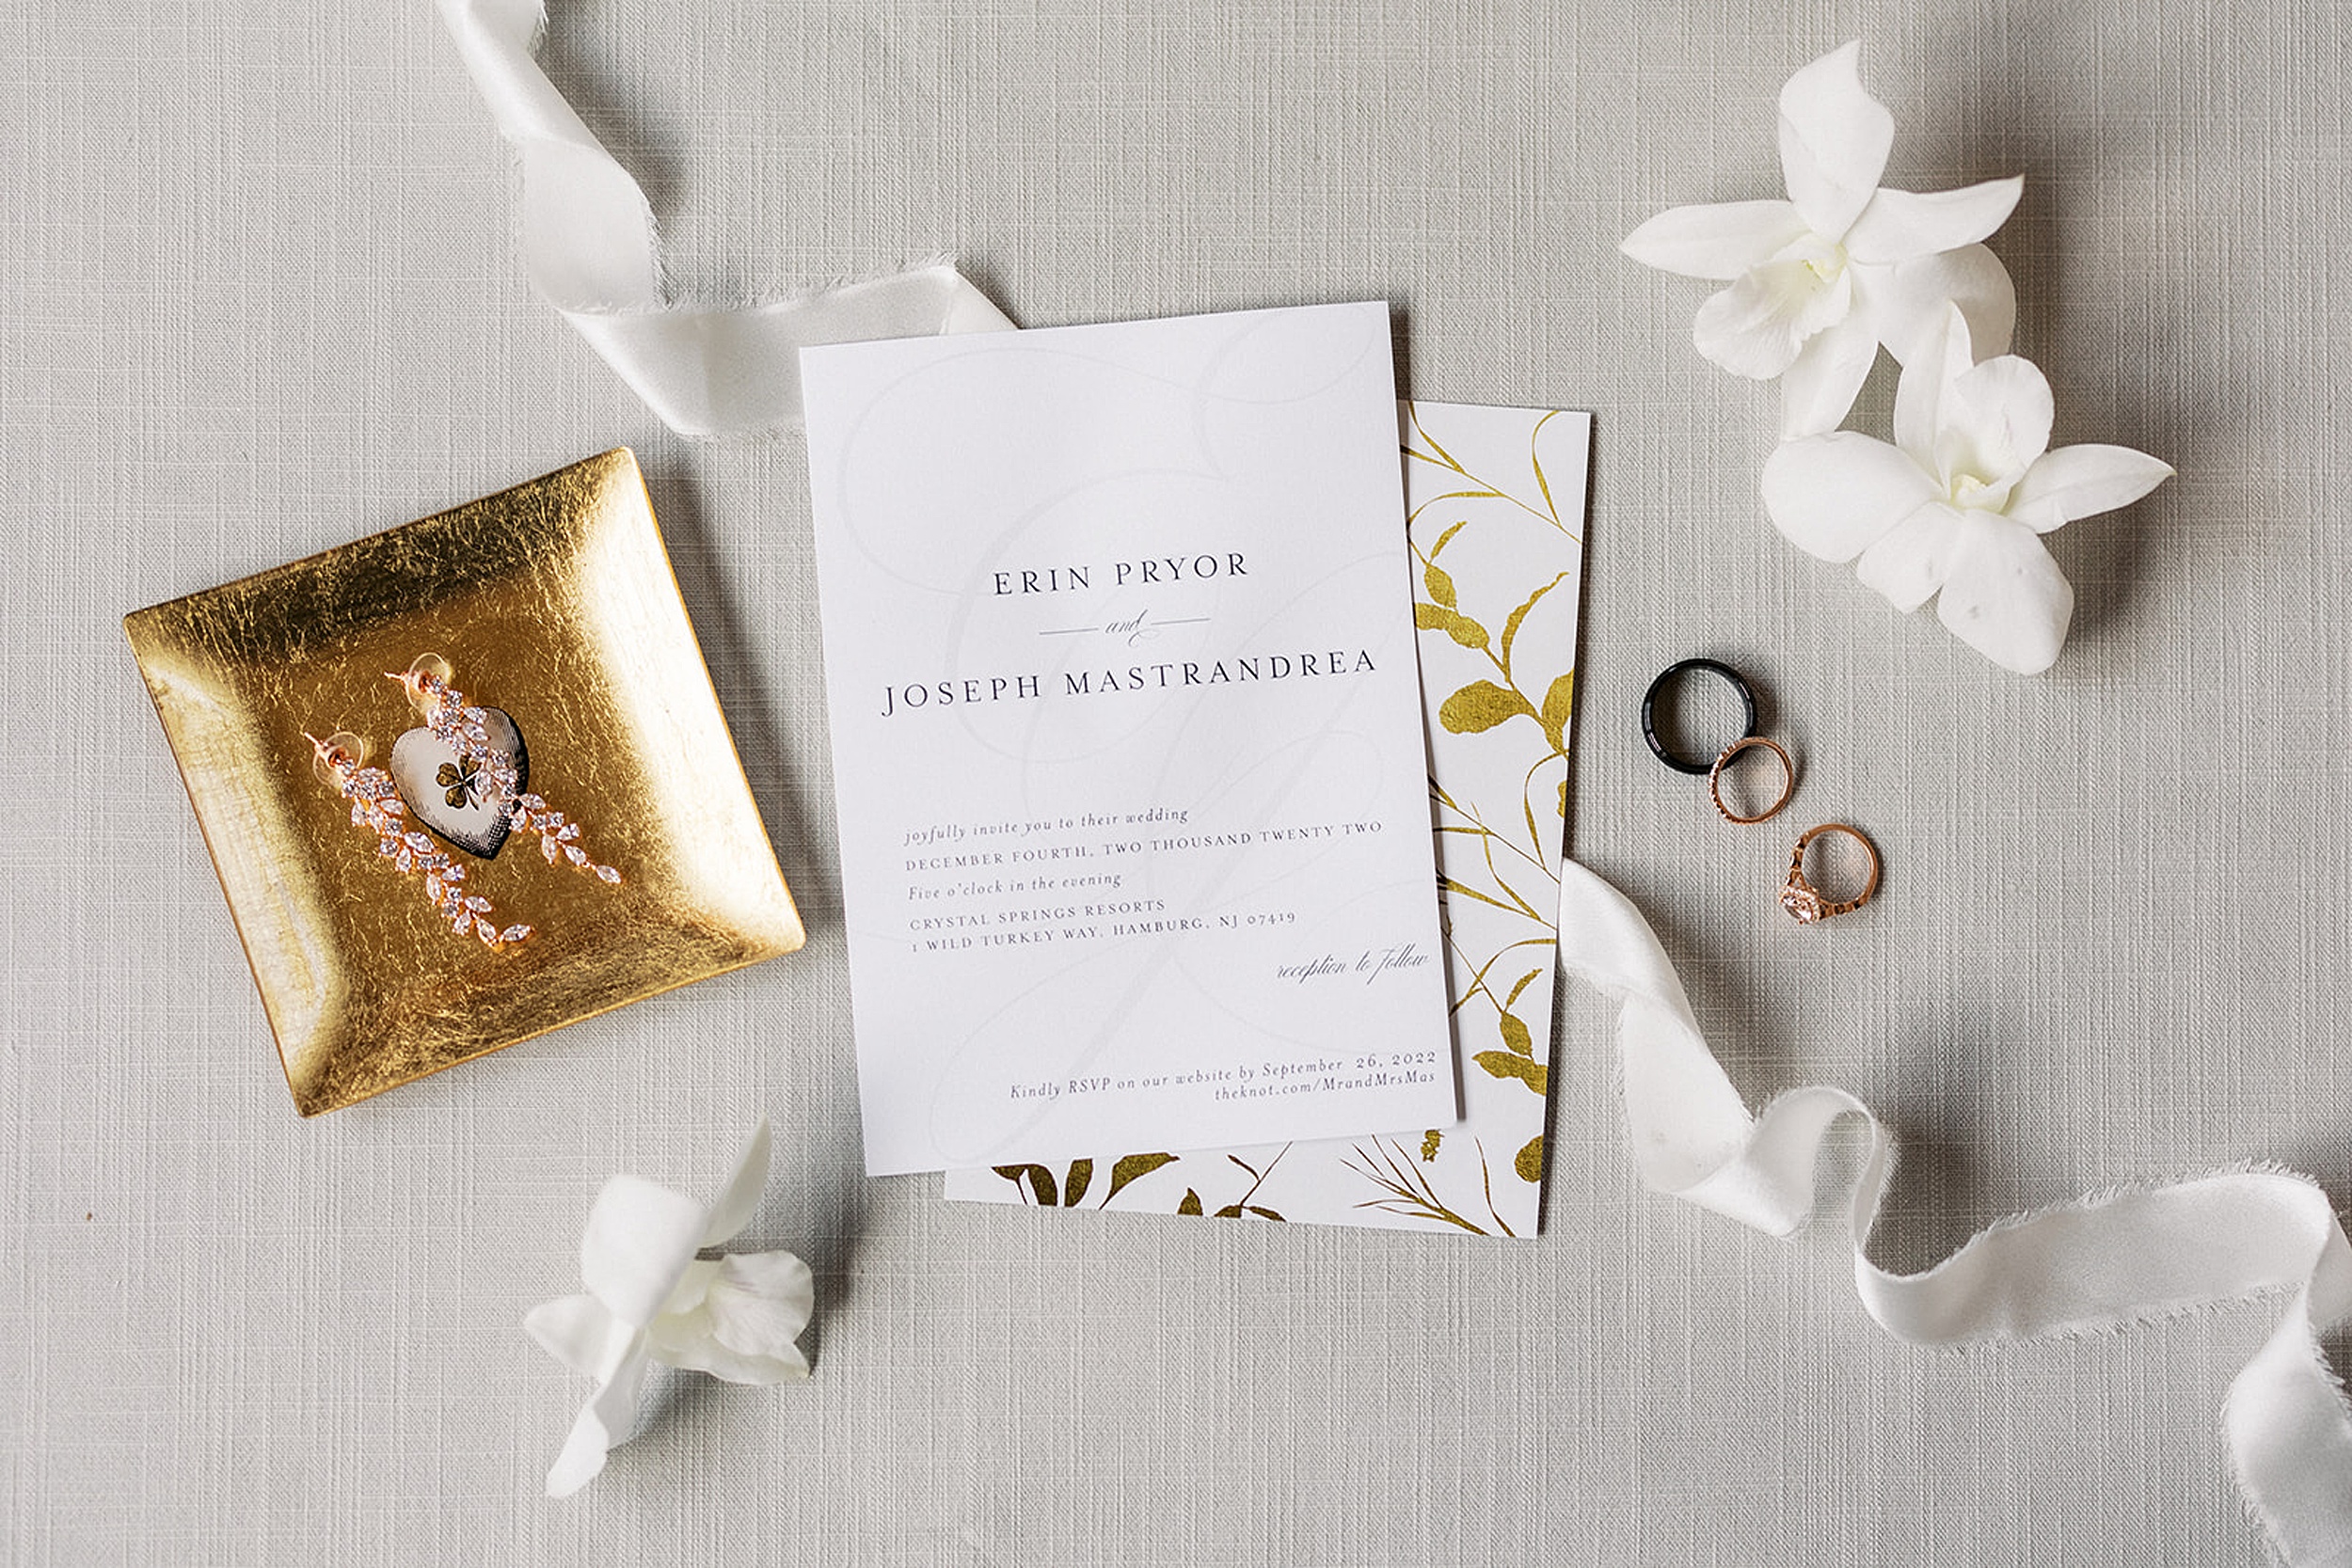 Details of wedding invitations, rings, earrings and white flowers